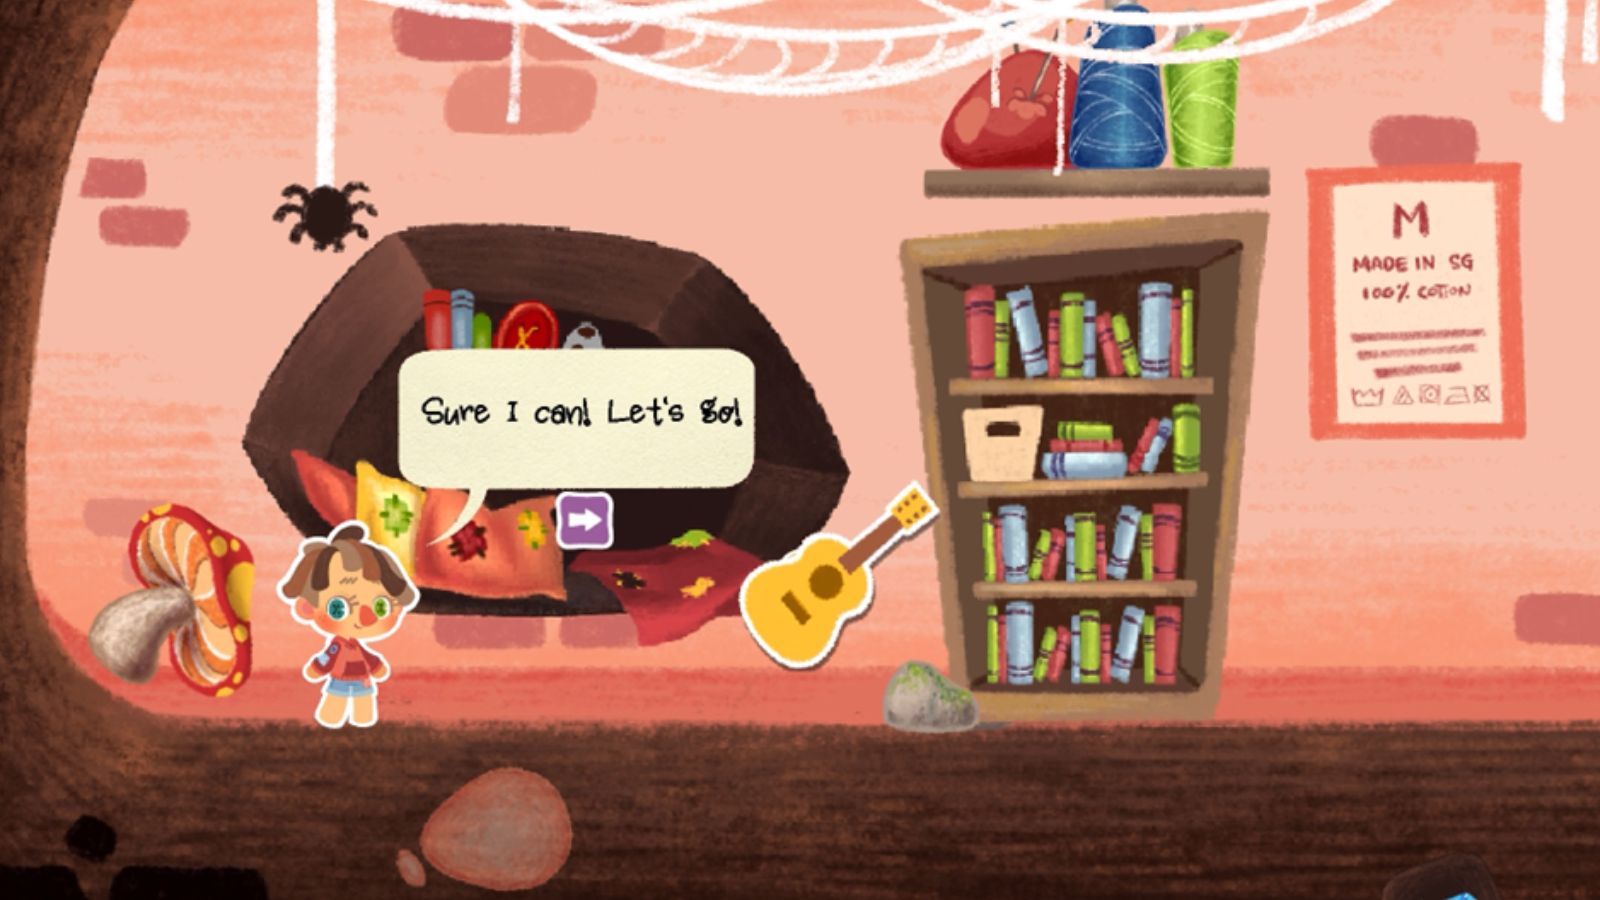 The main character, Brio, talks to a floating guitar.